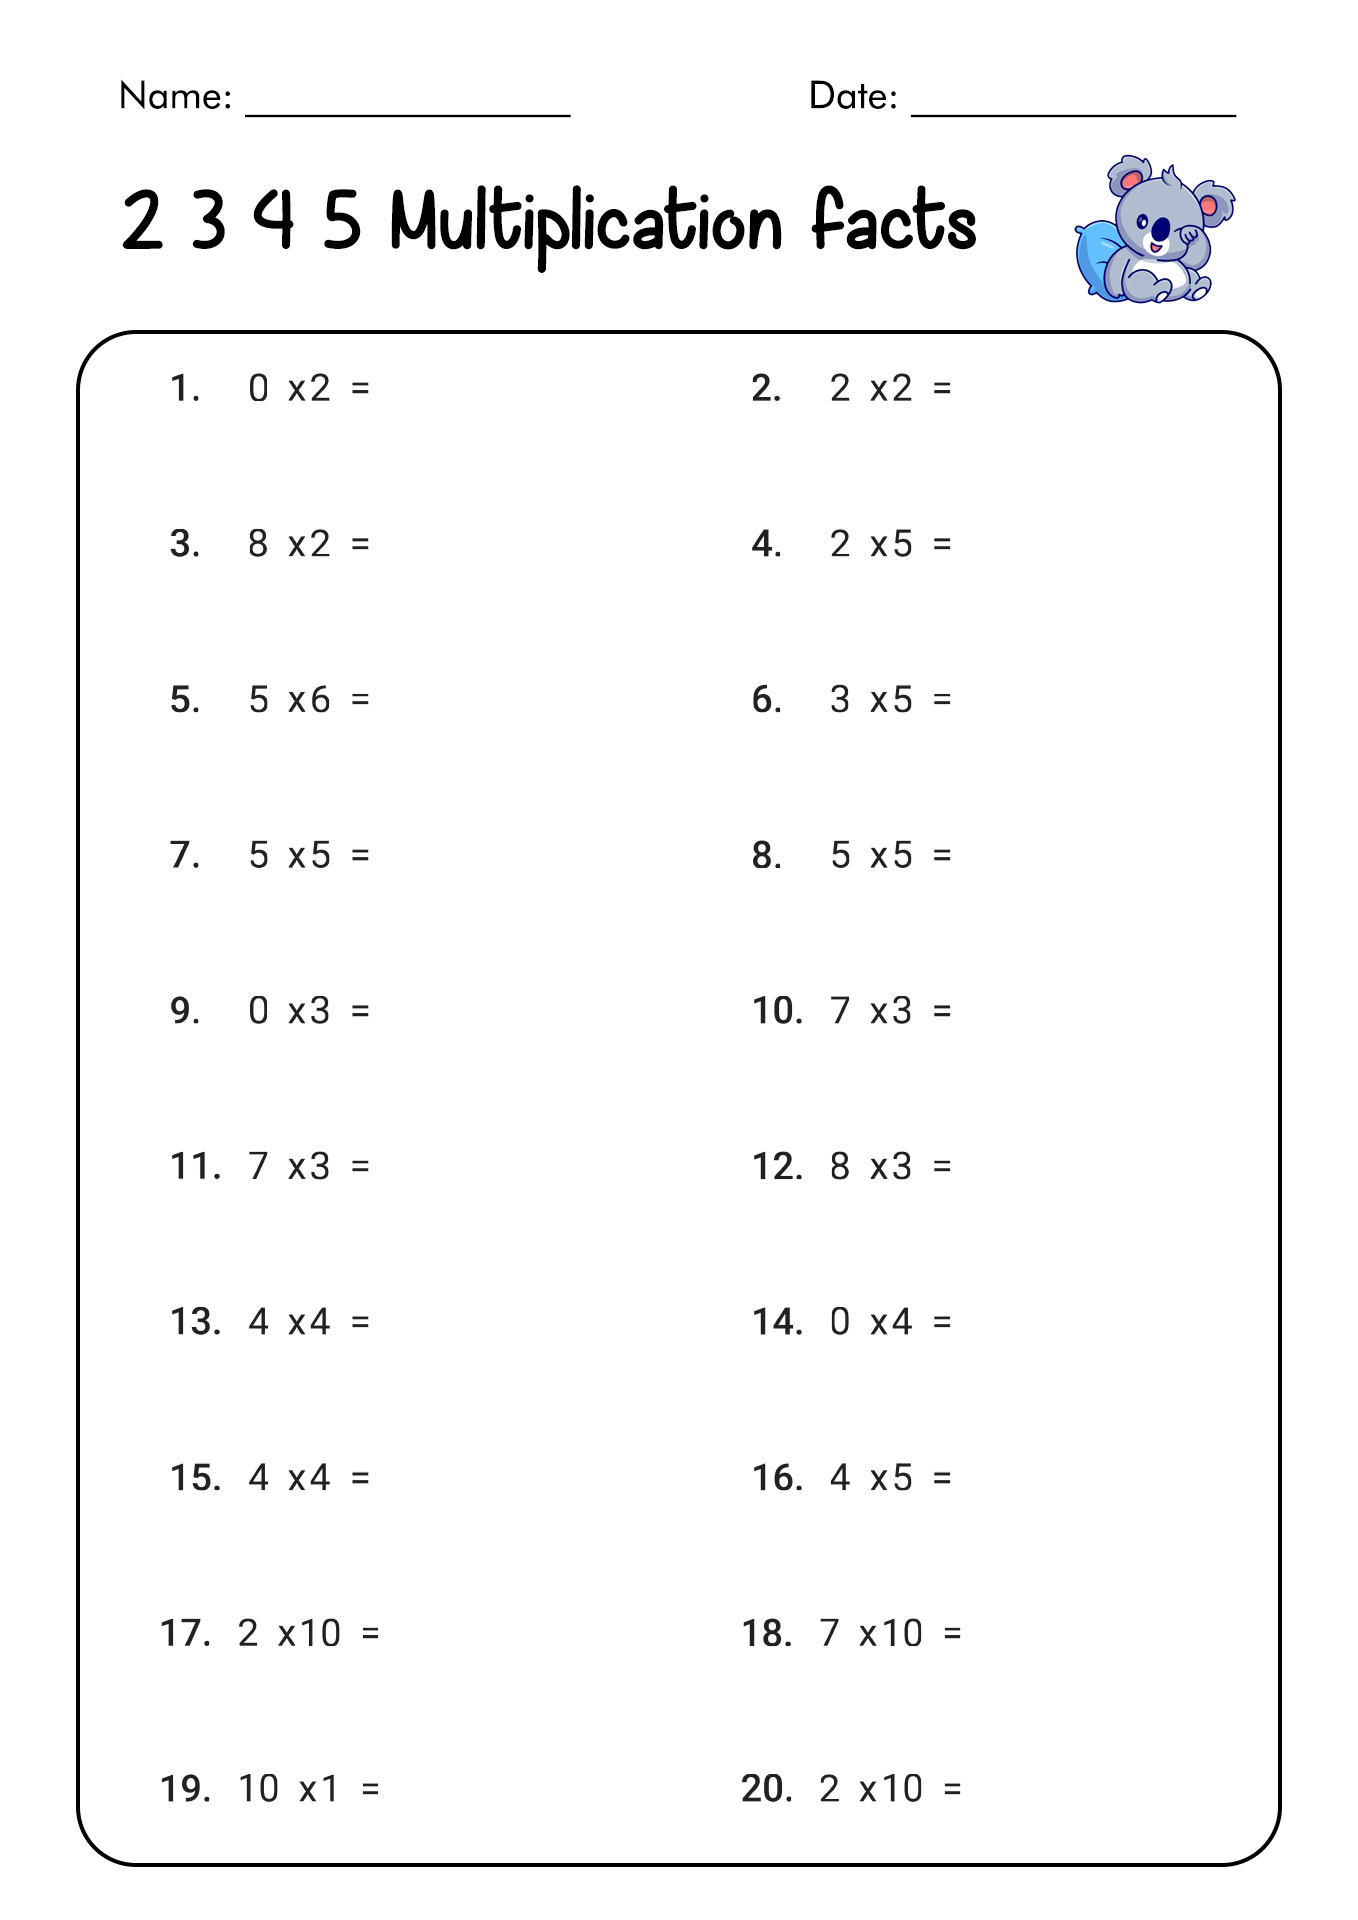 5s Multiplication Facts